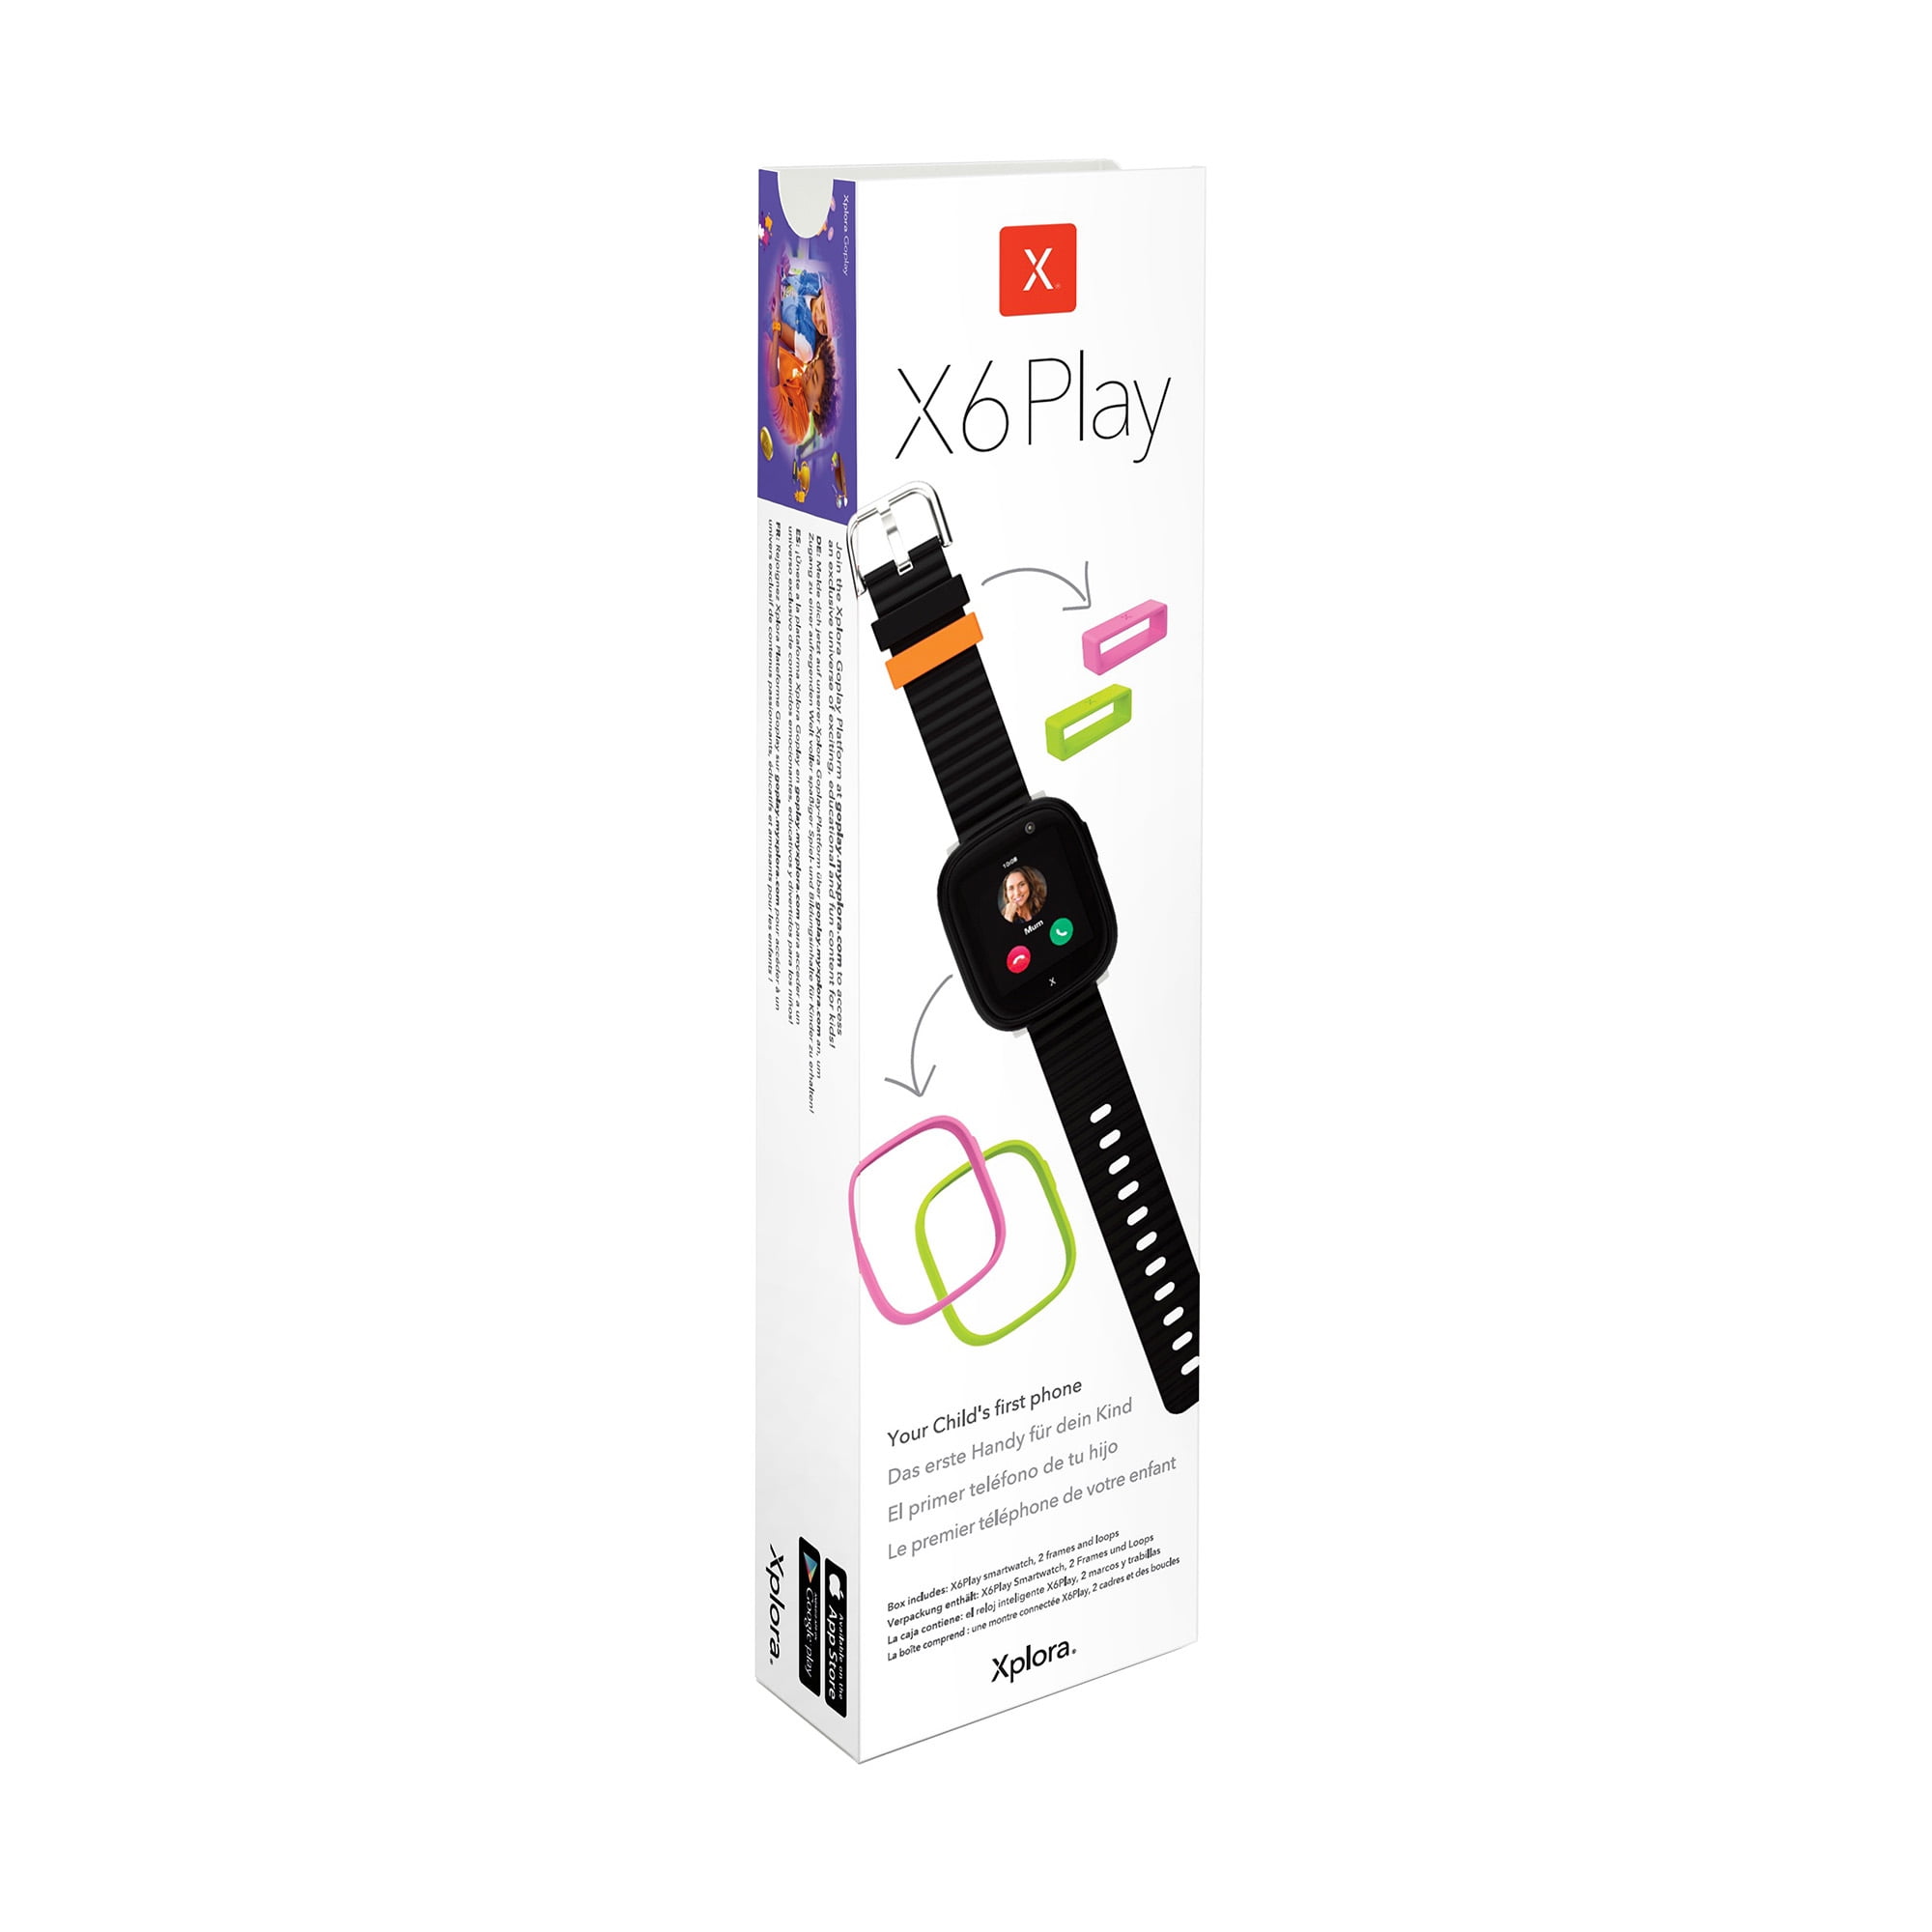 GPS Smart Kids with Watch Xplora Cell Tracker X6Play Phone